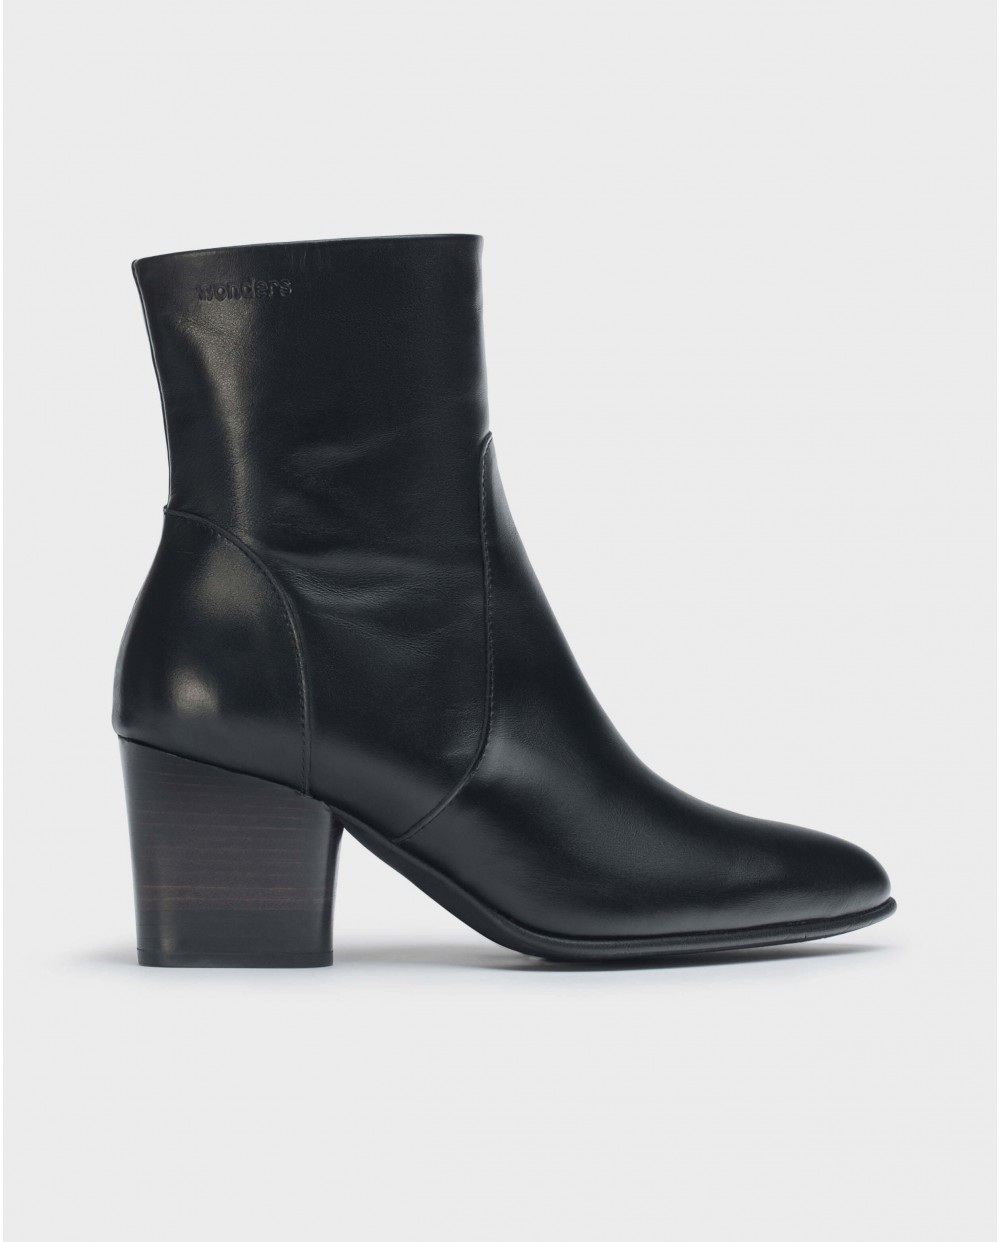 Wonders-Ankle Boots-Black Beta ankle boot